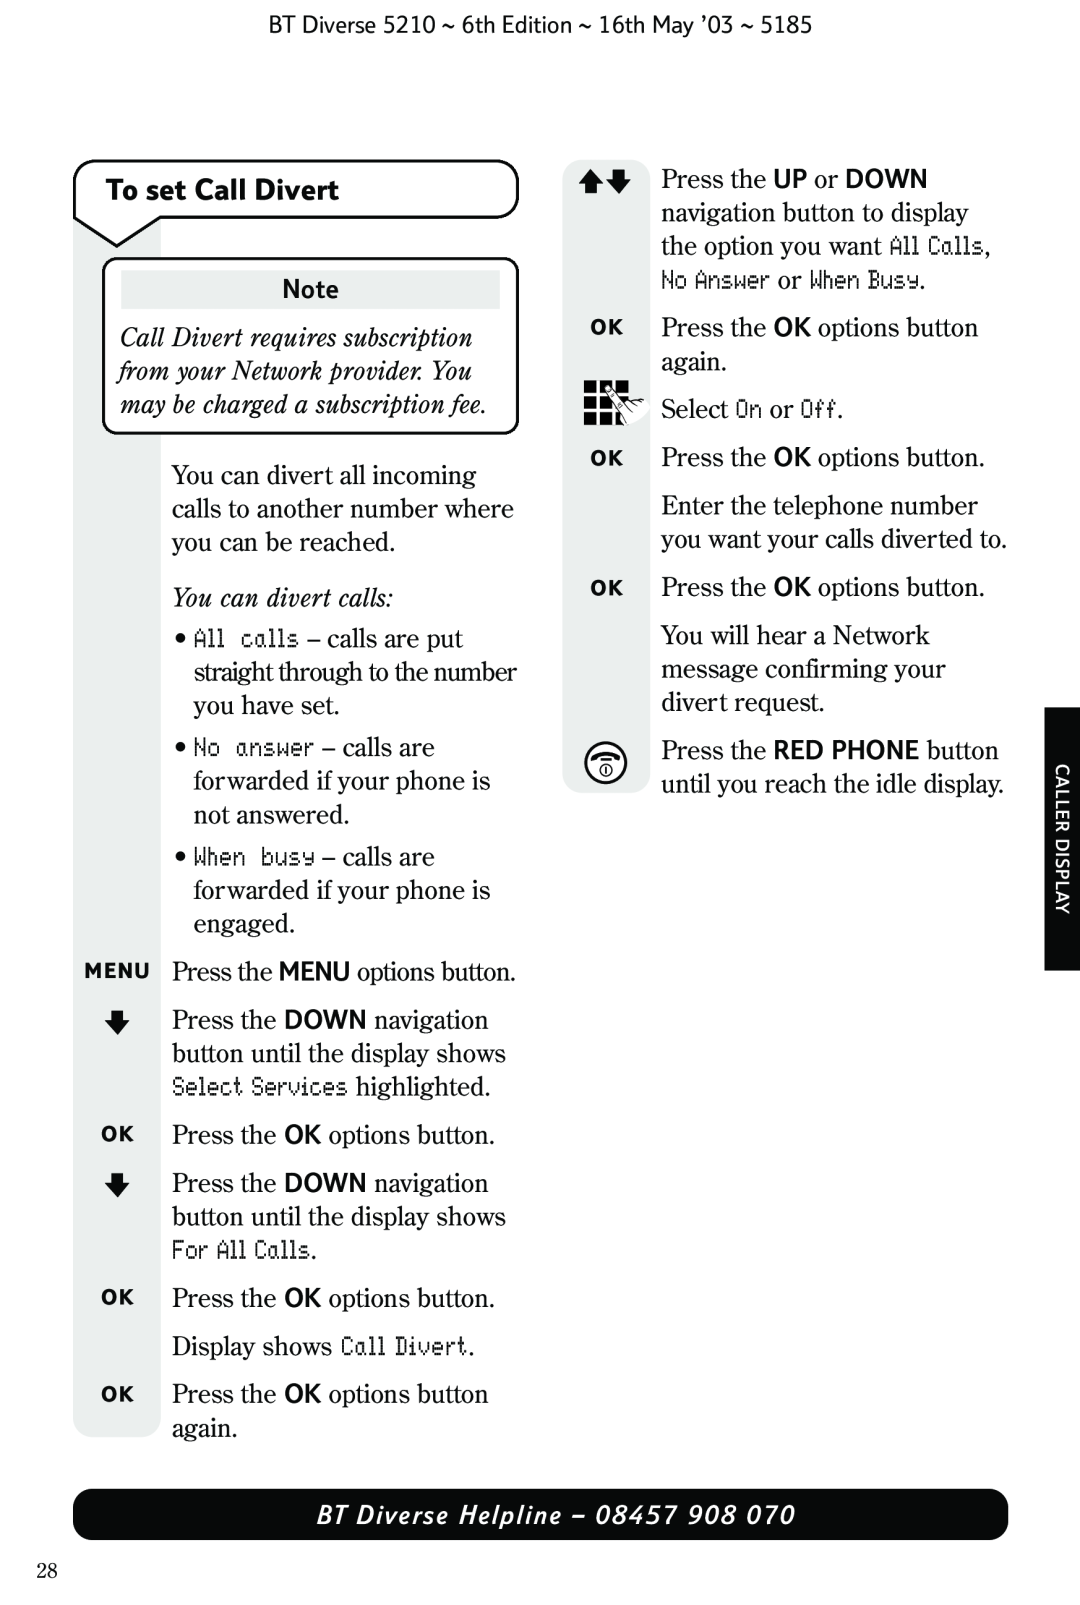 BT 5210 manual To set Call Divert, No Answer or When Busy, You can divert calls, BT Diverse Helpline - 08457 